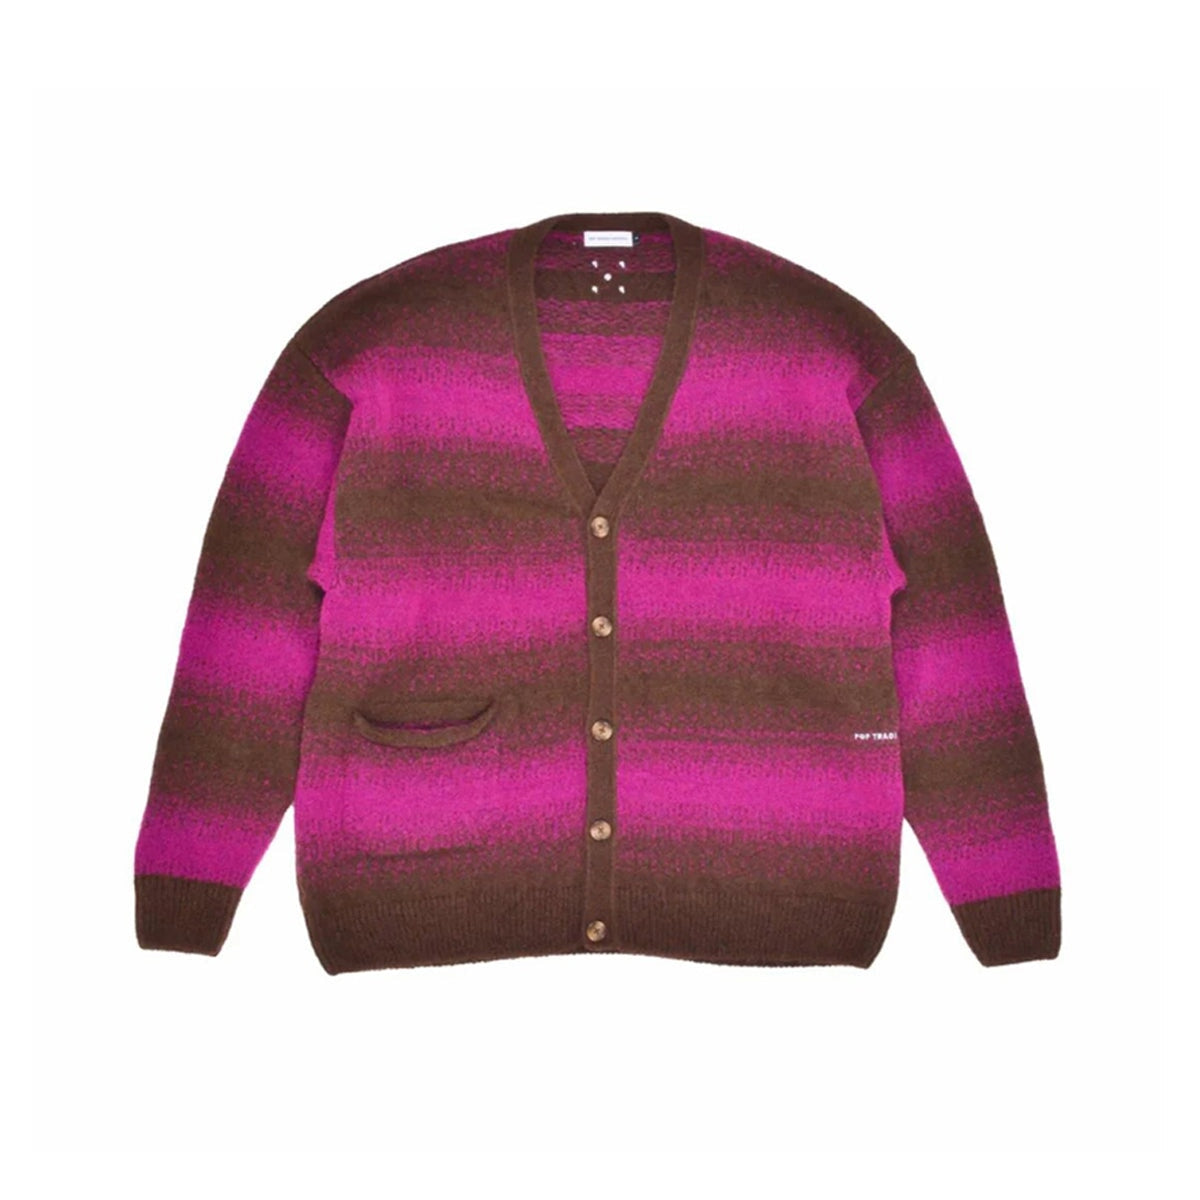 POP Trading Company Knitted Cardigan - Delicioso-Raspberry Weste POP Trading Company 